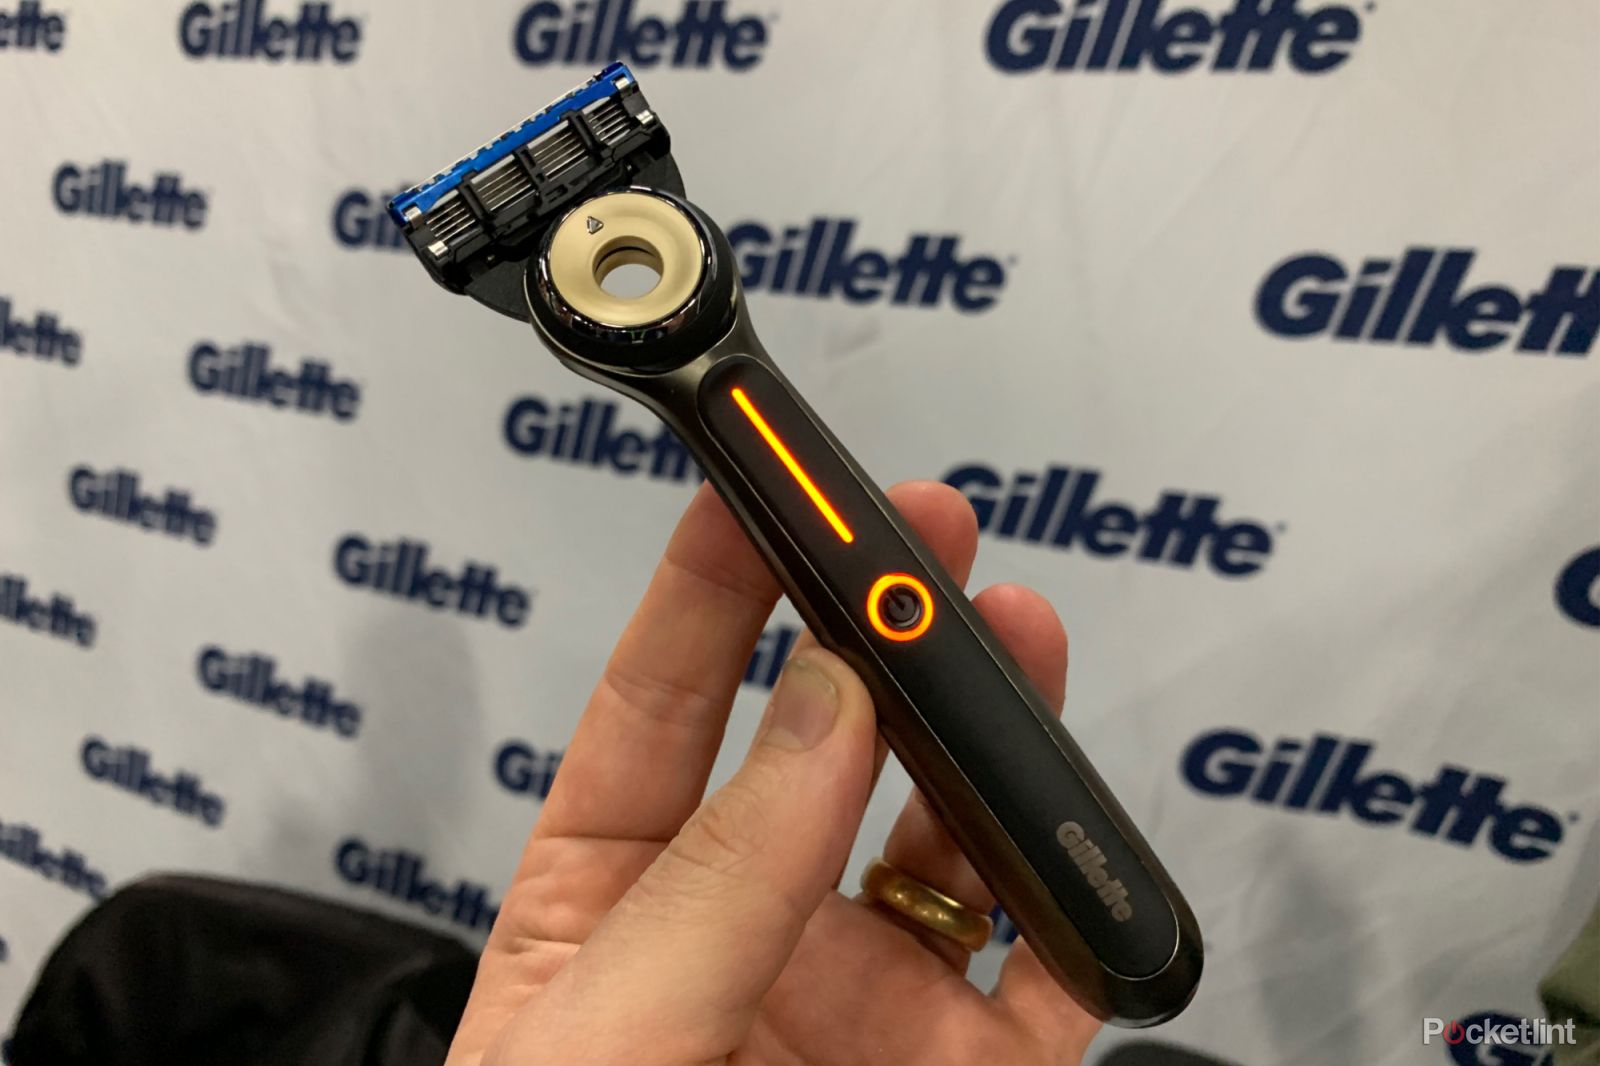 Gillette Heated Razor promises that Hot Towel shave at home image 1